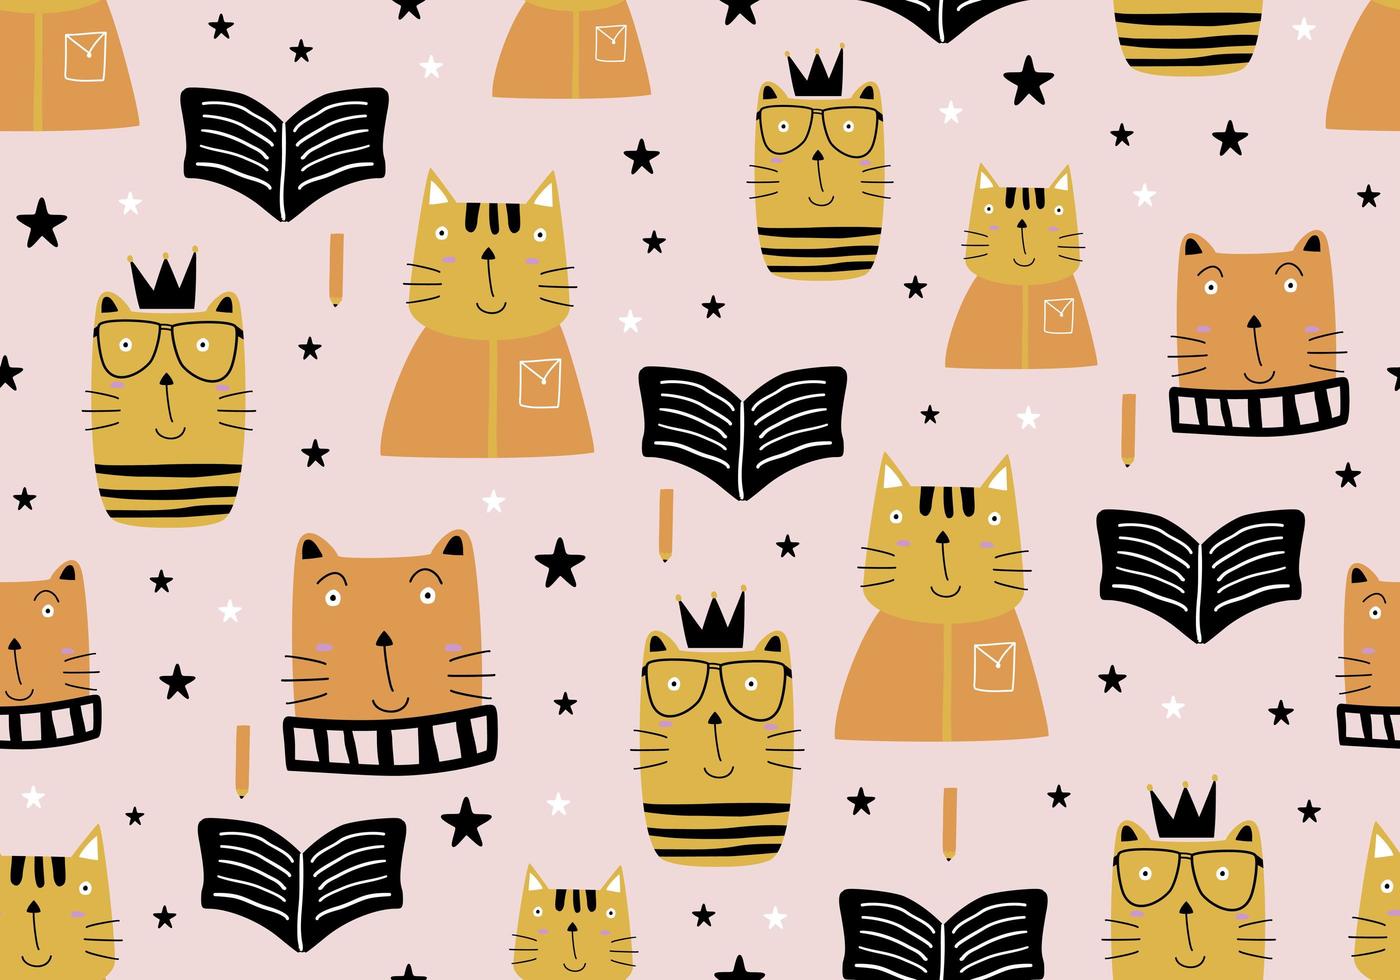 Cute cats pattern, vector illustration childish drawing for kids and baby fashion textile print. Animal and book on pink background.